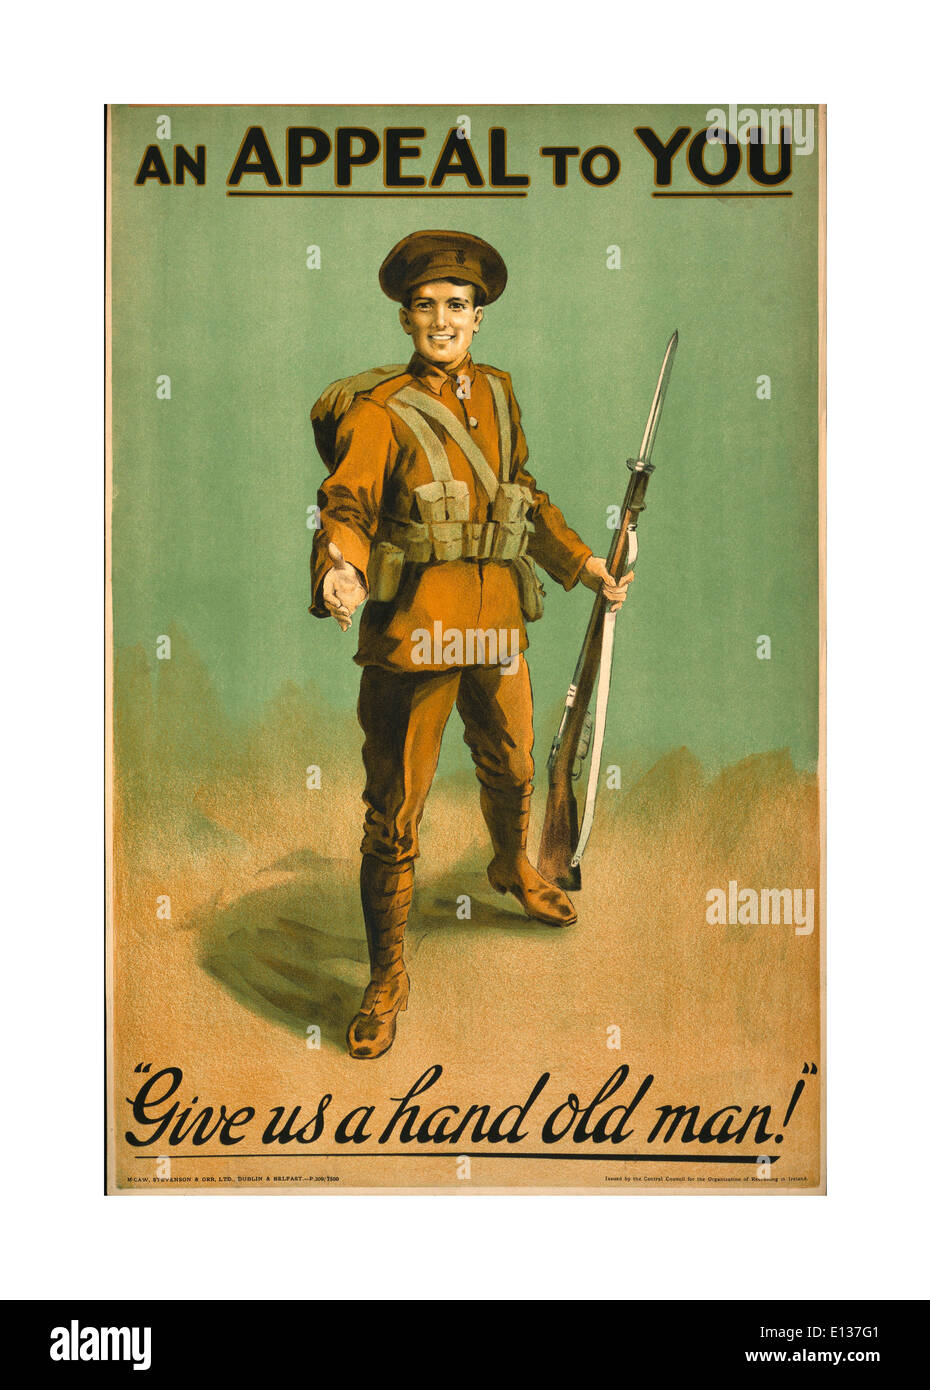 WW1 UK Recruitment propaganda poster in1914 showing a British soldier making an appeal to join up to the army Stock Photo